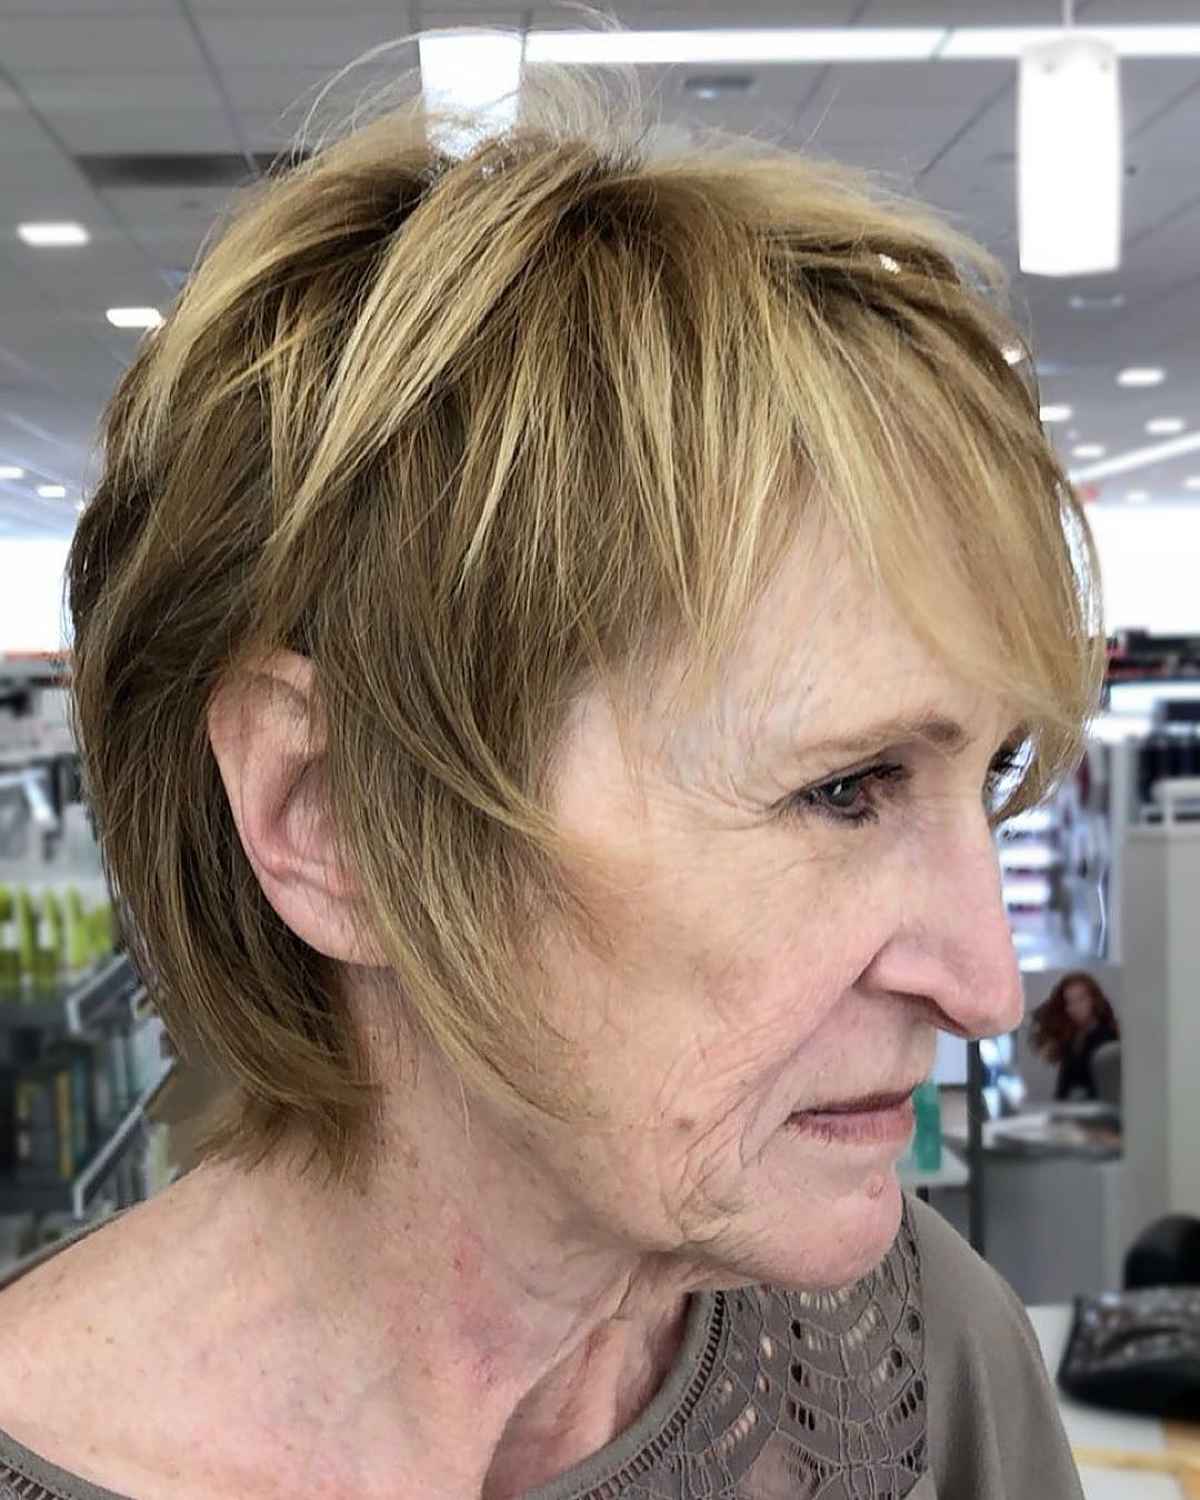 25 Short Shaggy Haircuts Women In Their 60s Can Totally Pull Off